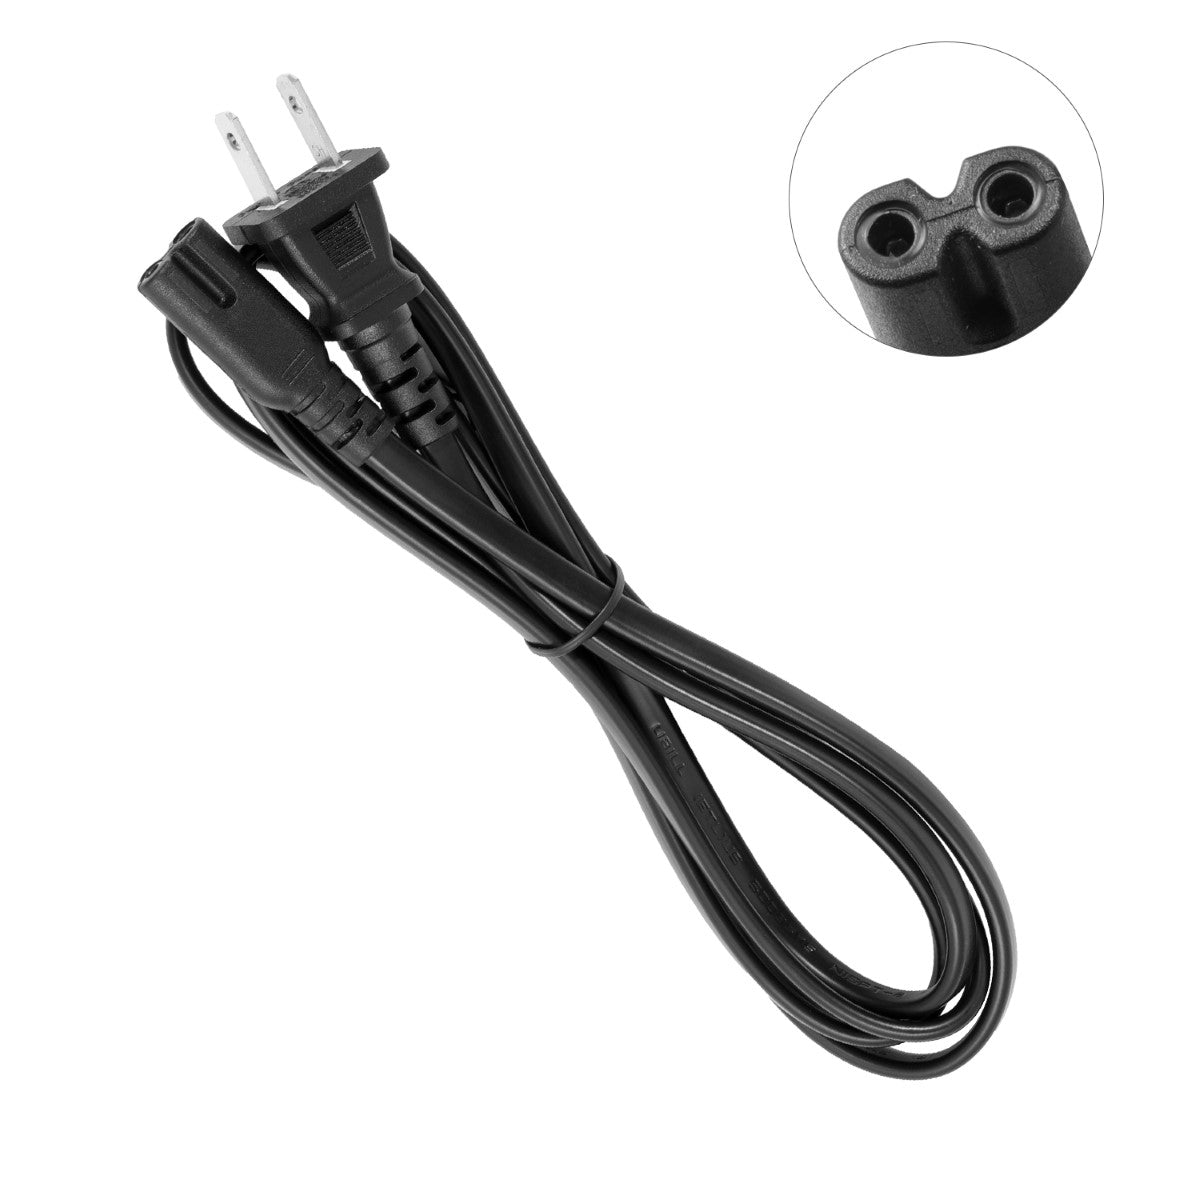 Power Cord for HP ENVY 7645 e-All-in-One Printer.